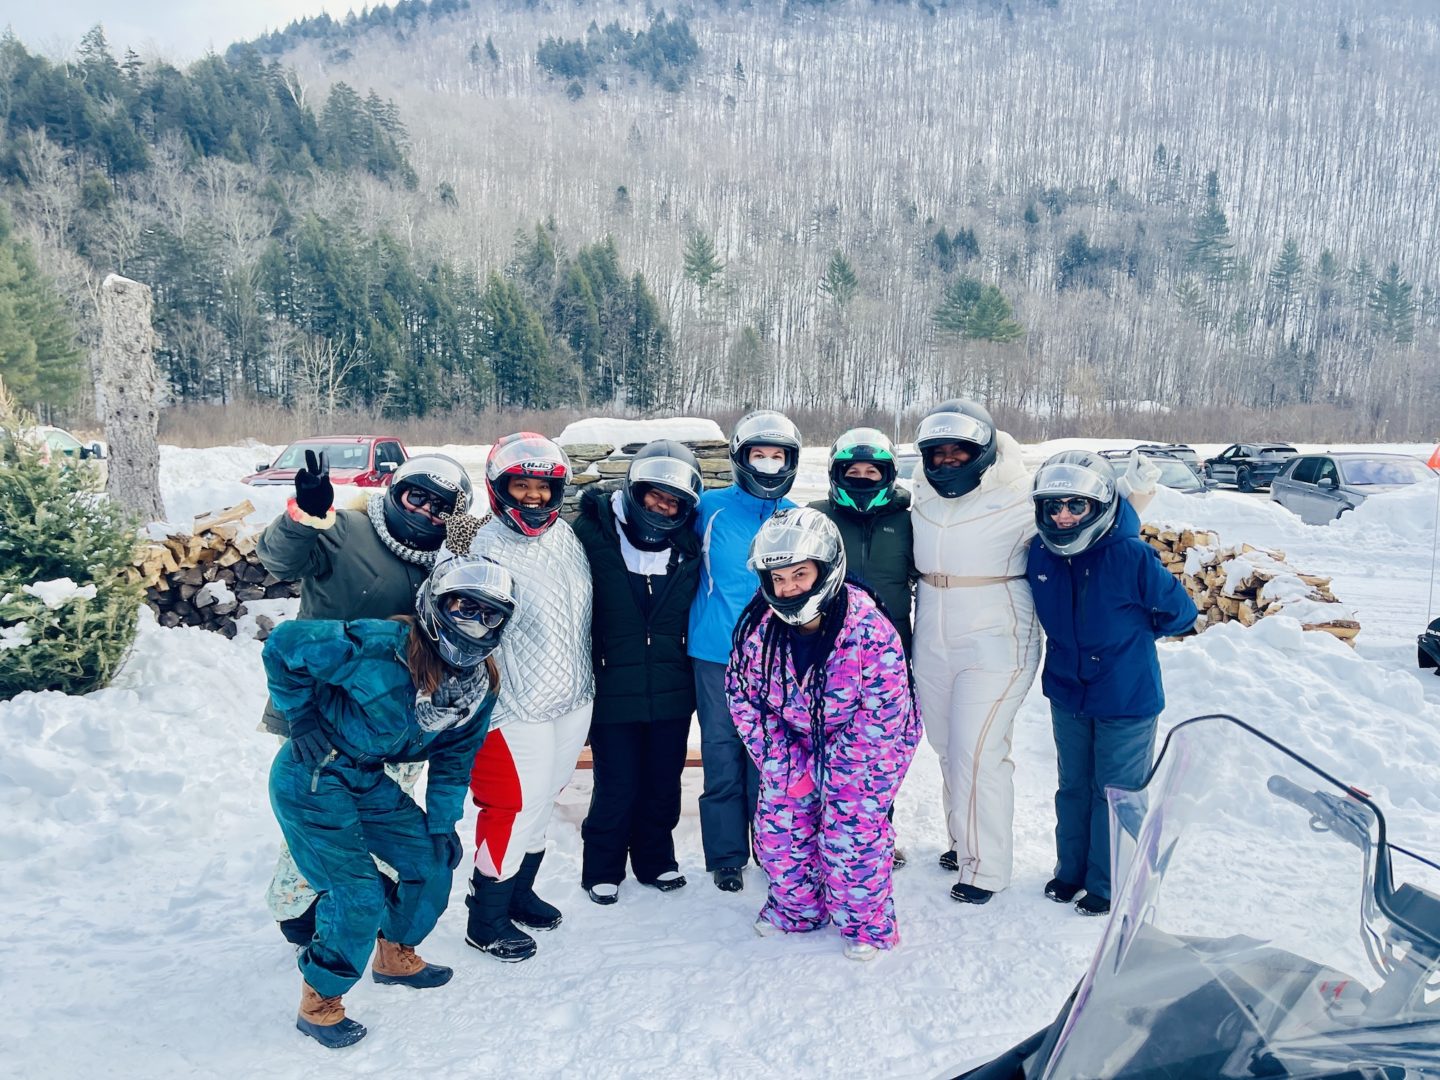 How To Spend A Weekend in Killington, Vermont